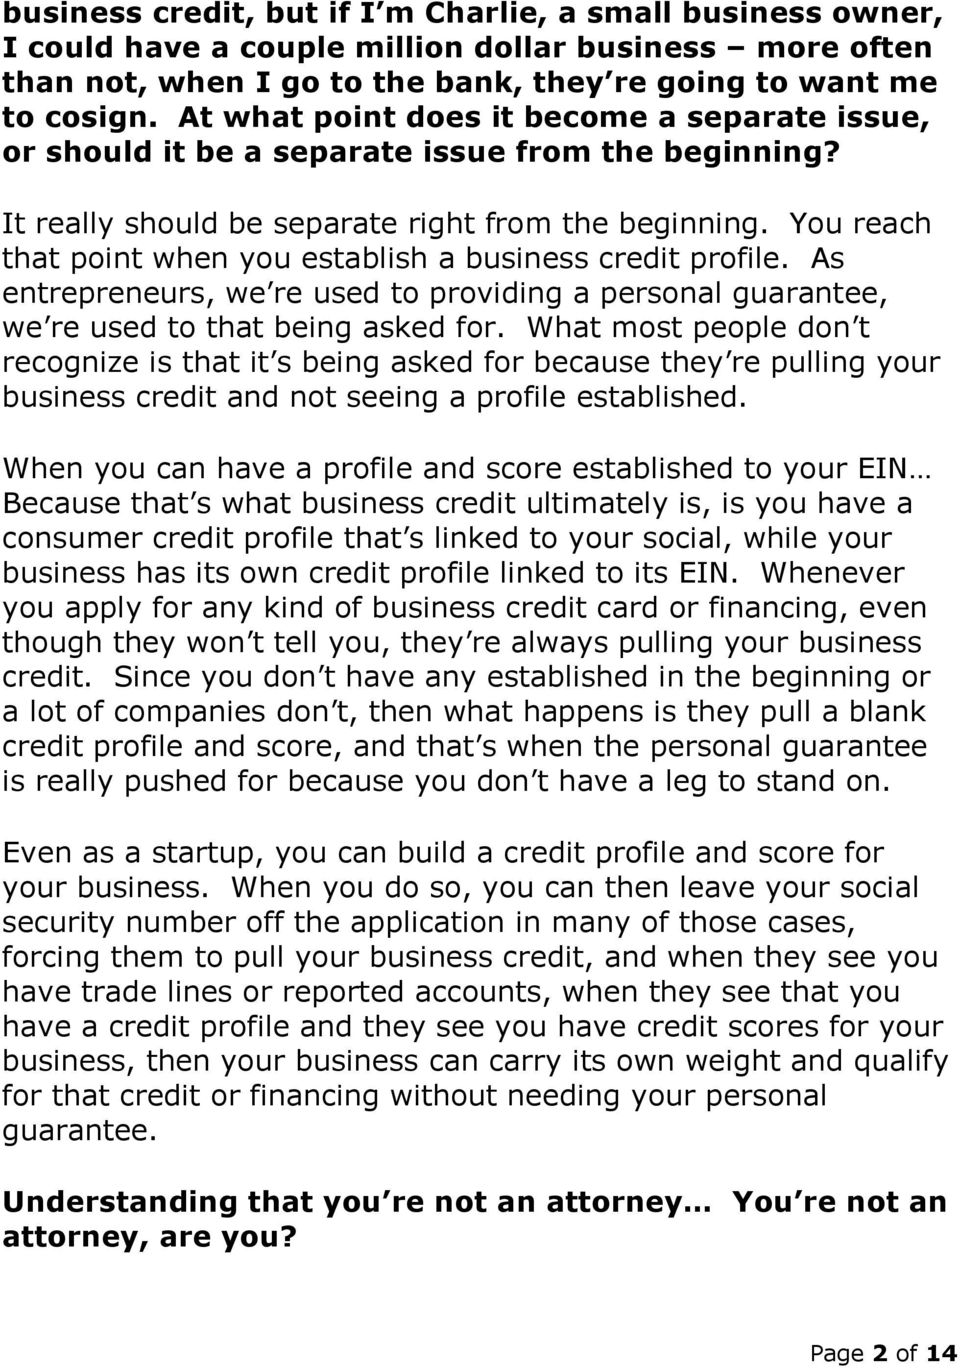 You reach that point when you establish a business credit profile. As entrepreneurs, we re used to providing a personal guarantee, we re used to that being asked for.